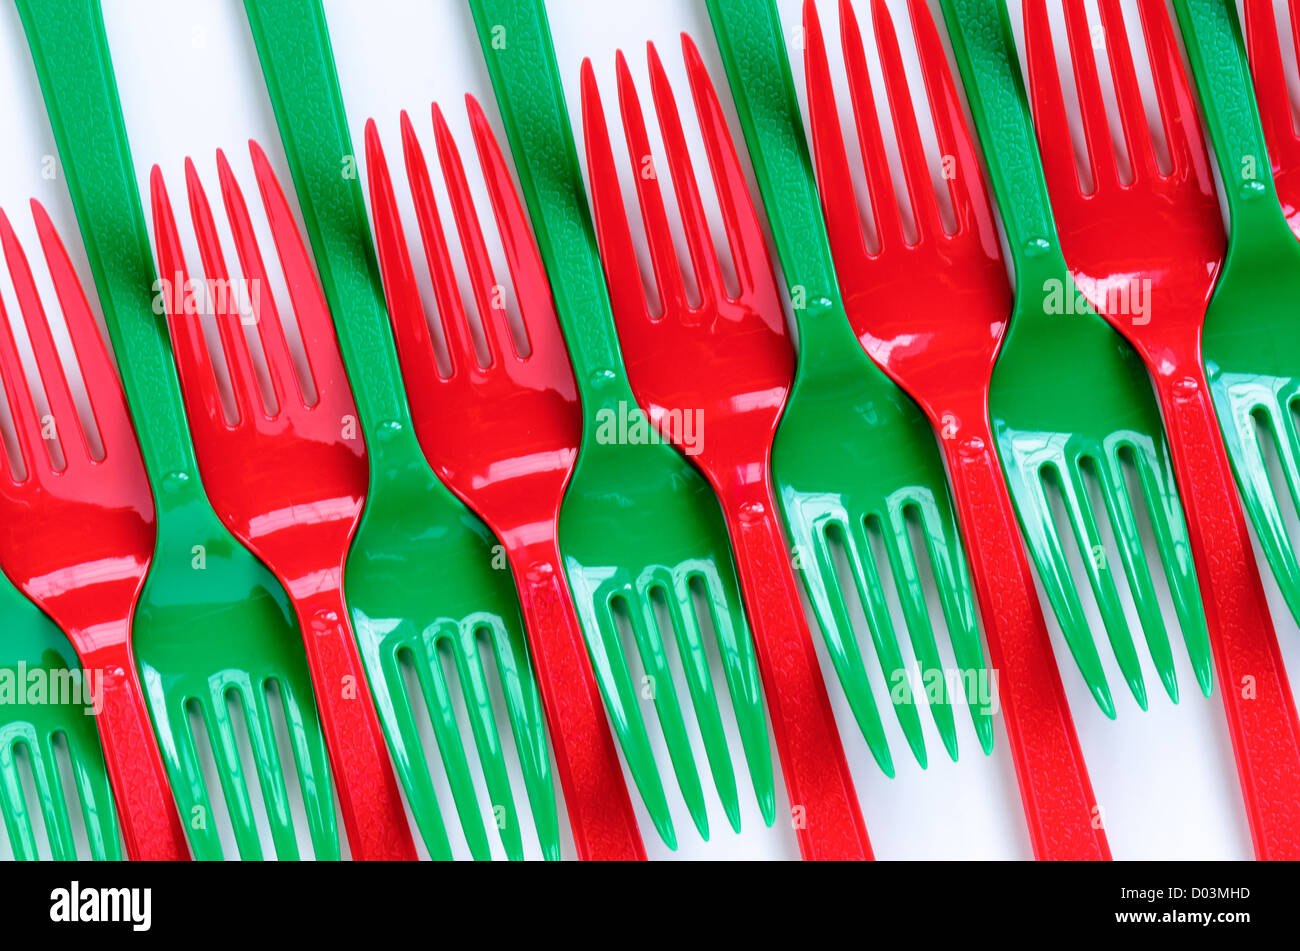 Row of red and green plastic forks Stock Photo